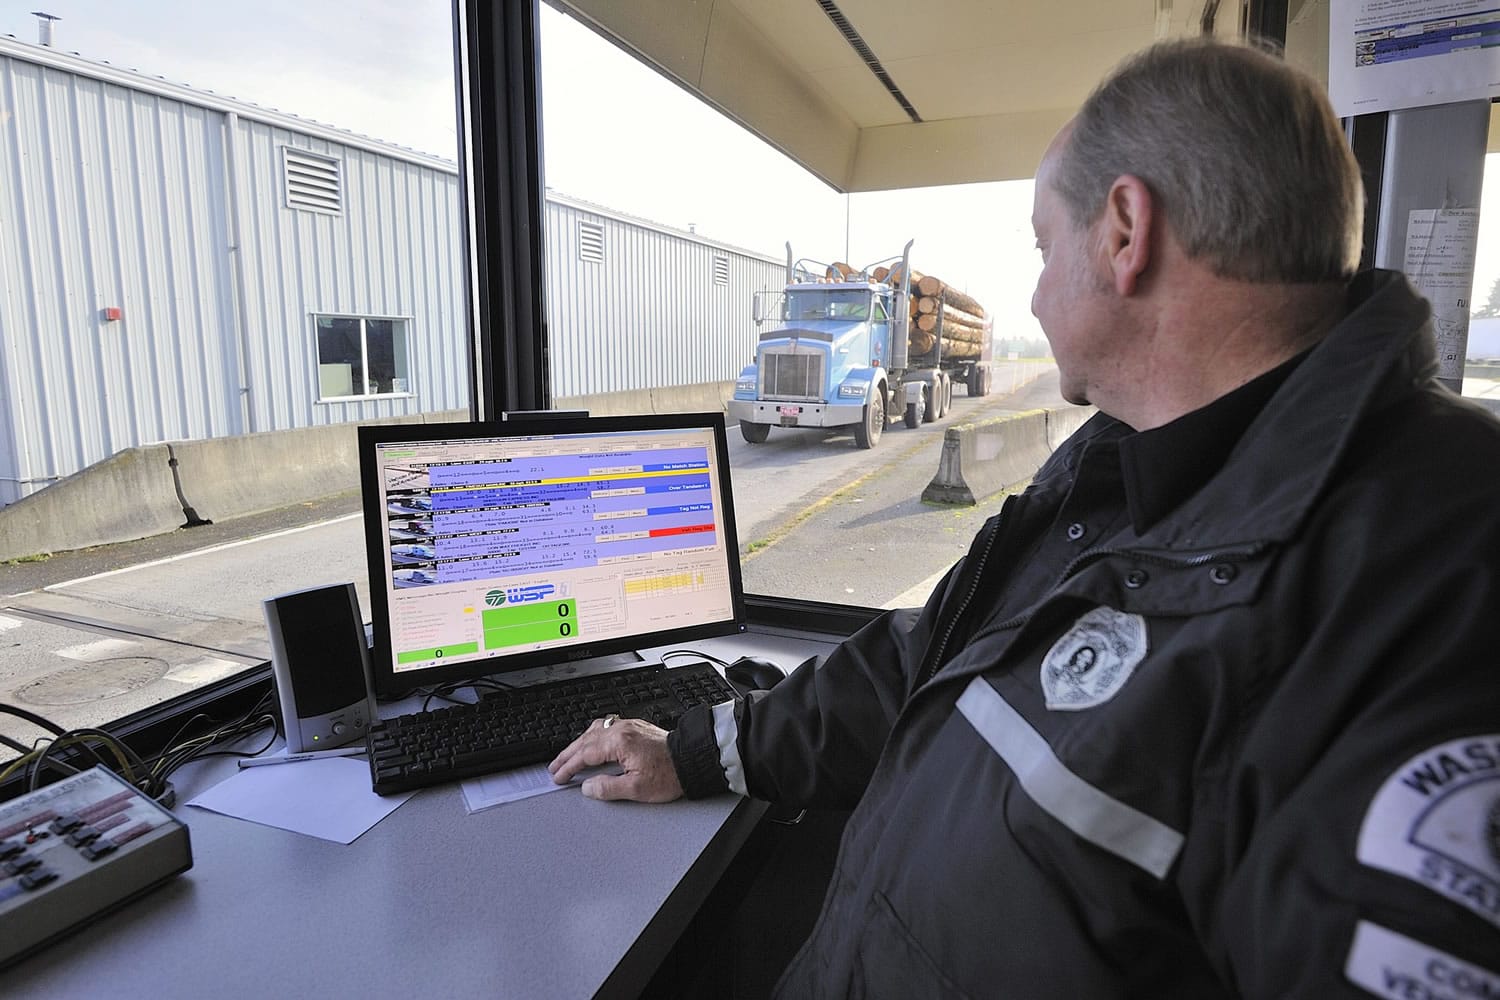 Commercial vehicle enforcement officer Robert Schultheis with the Washington State Patrol uses a computer with new software to monitor big rigs on Interstate 5 in Ridgefield.